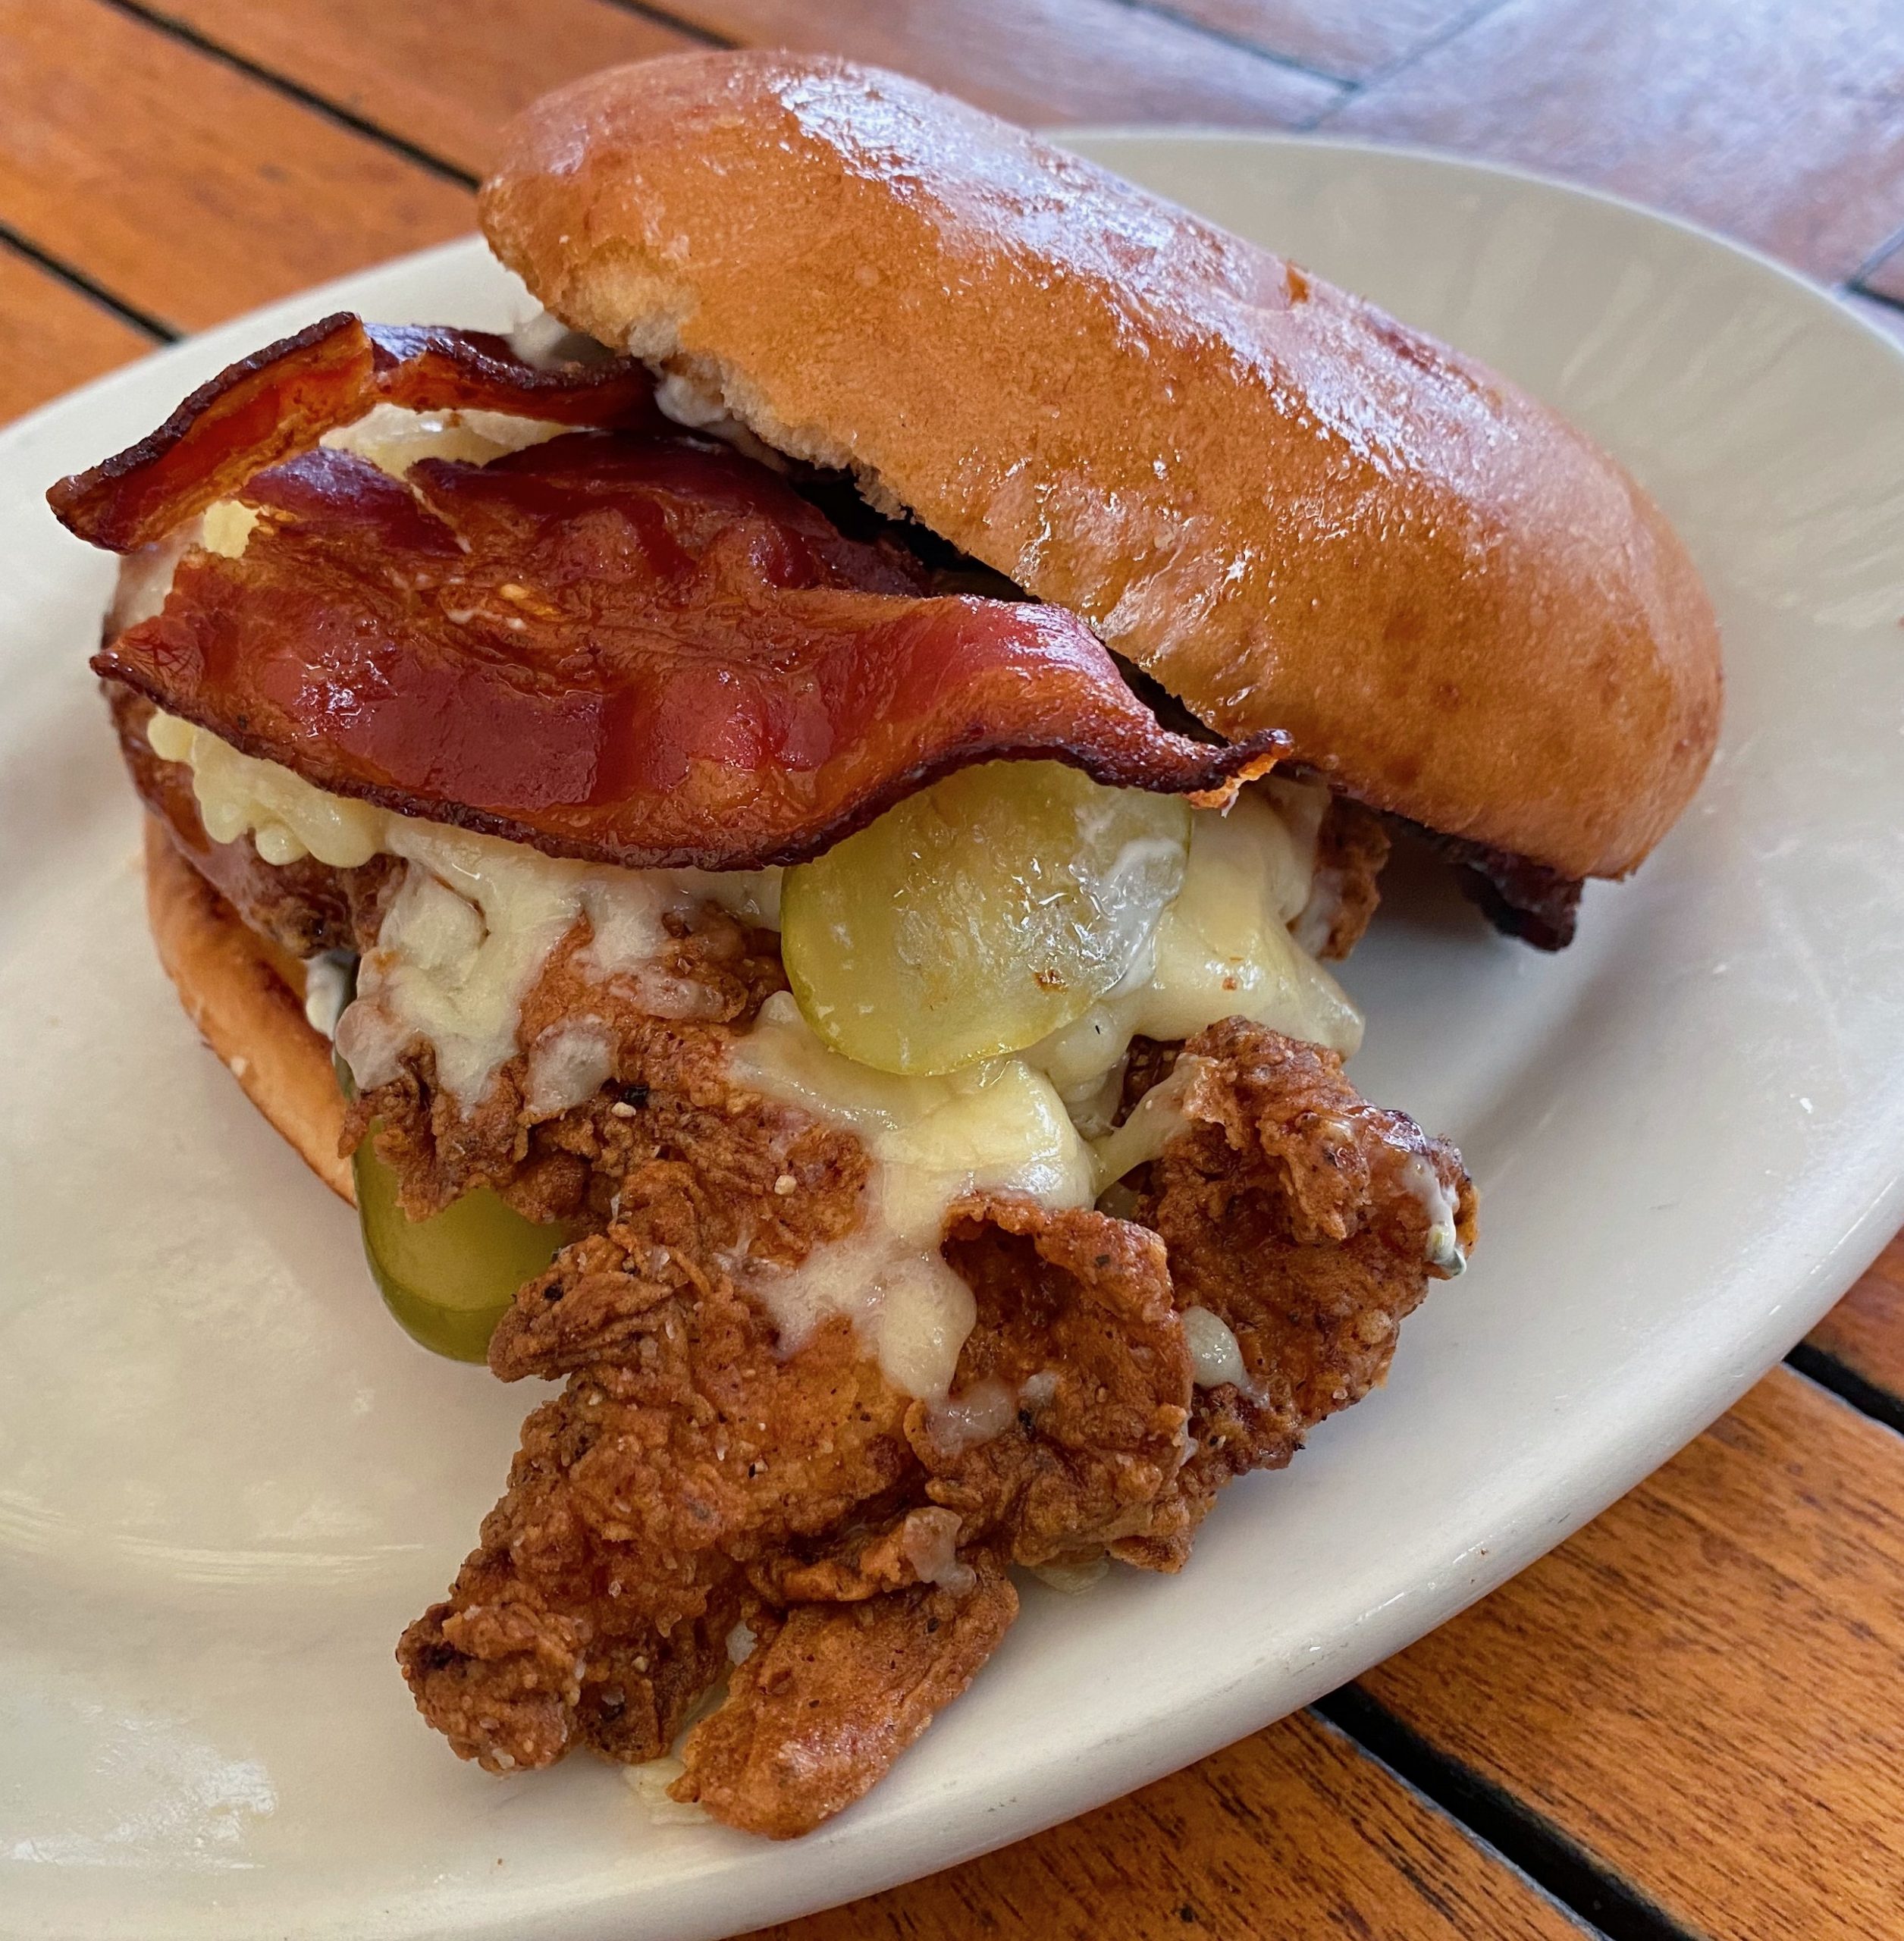 A fried chicken sandwich with pickles, bacon, and cheddar cheese.